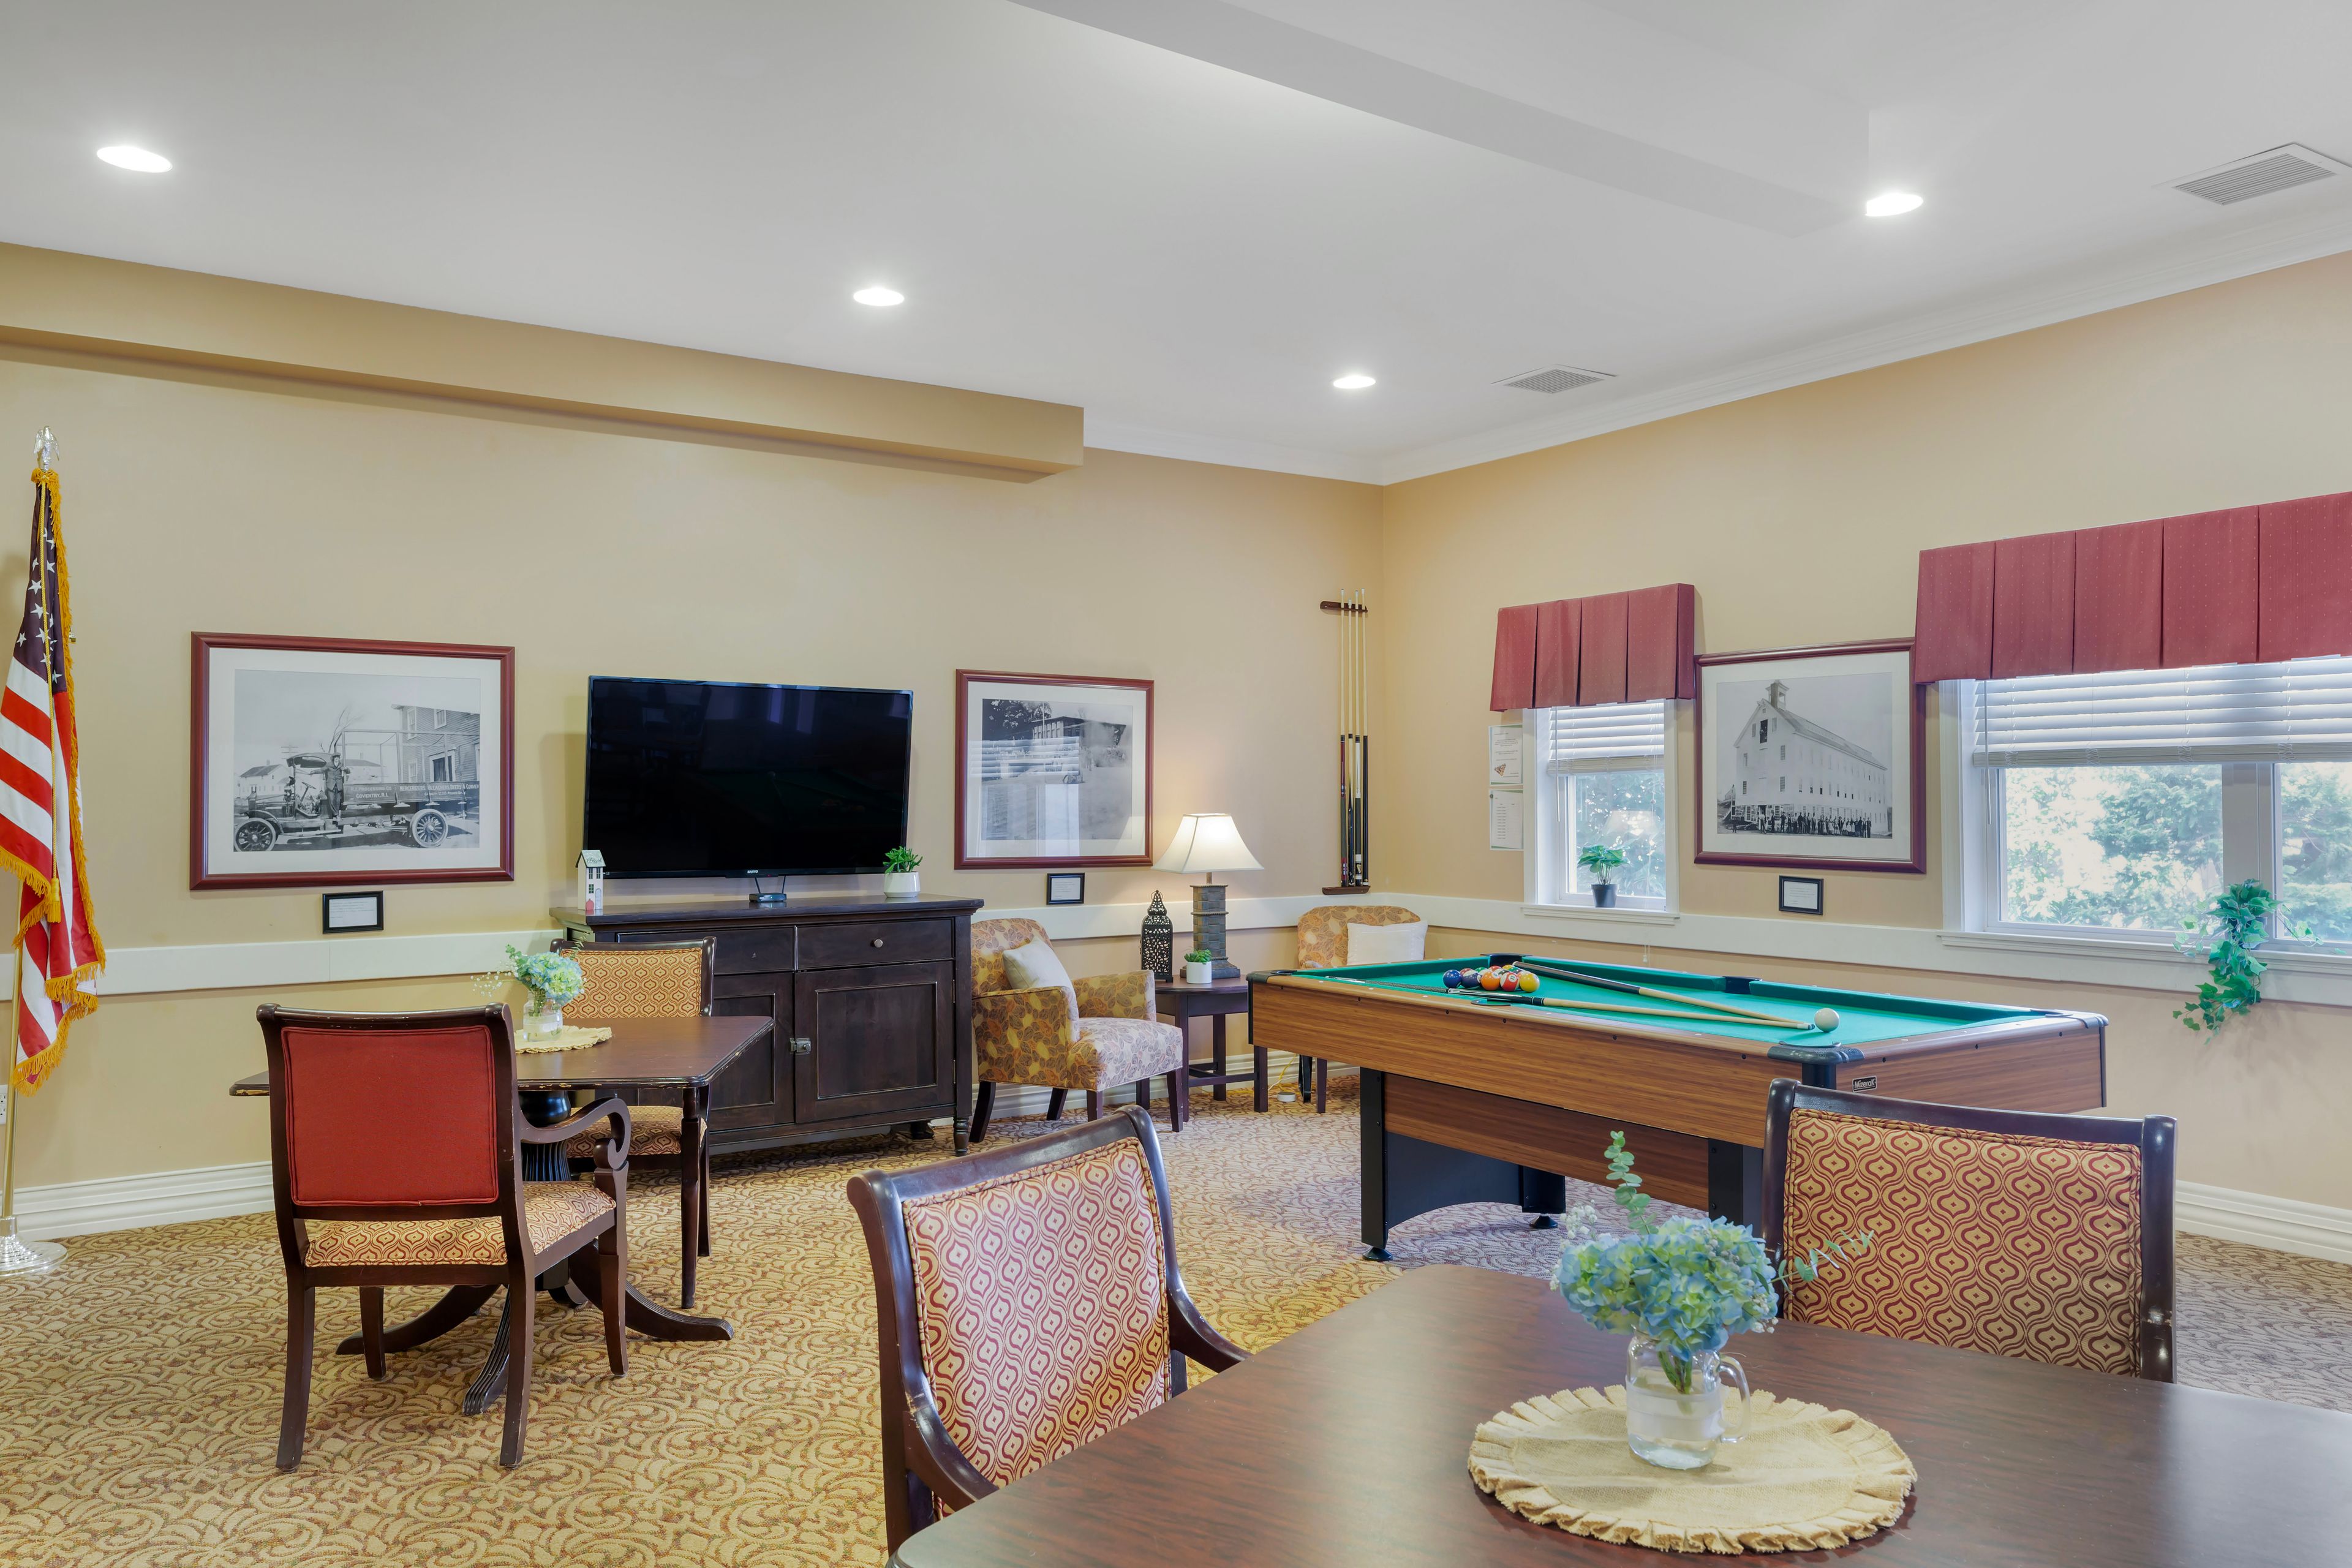 Interior view of Brookdale Centre of New England senior living community with modern amenities.